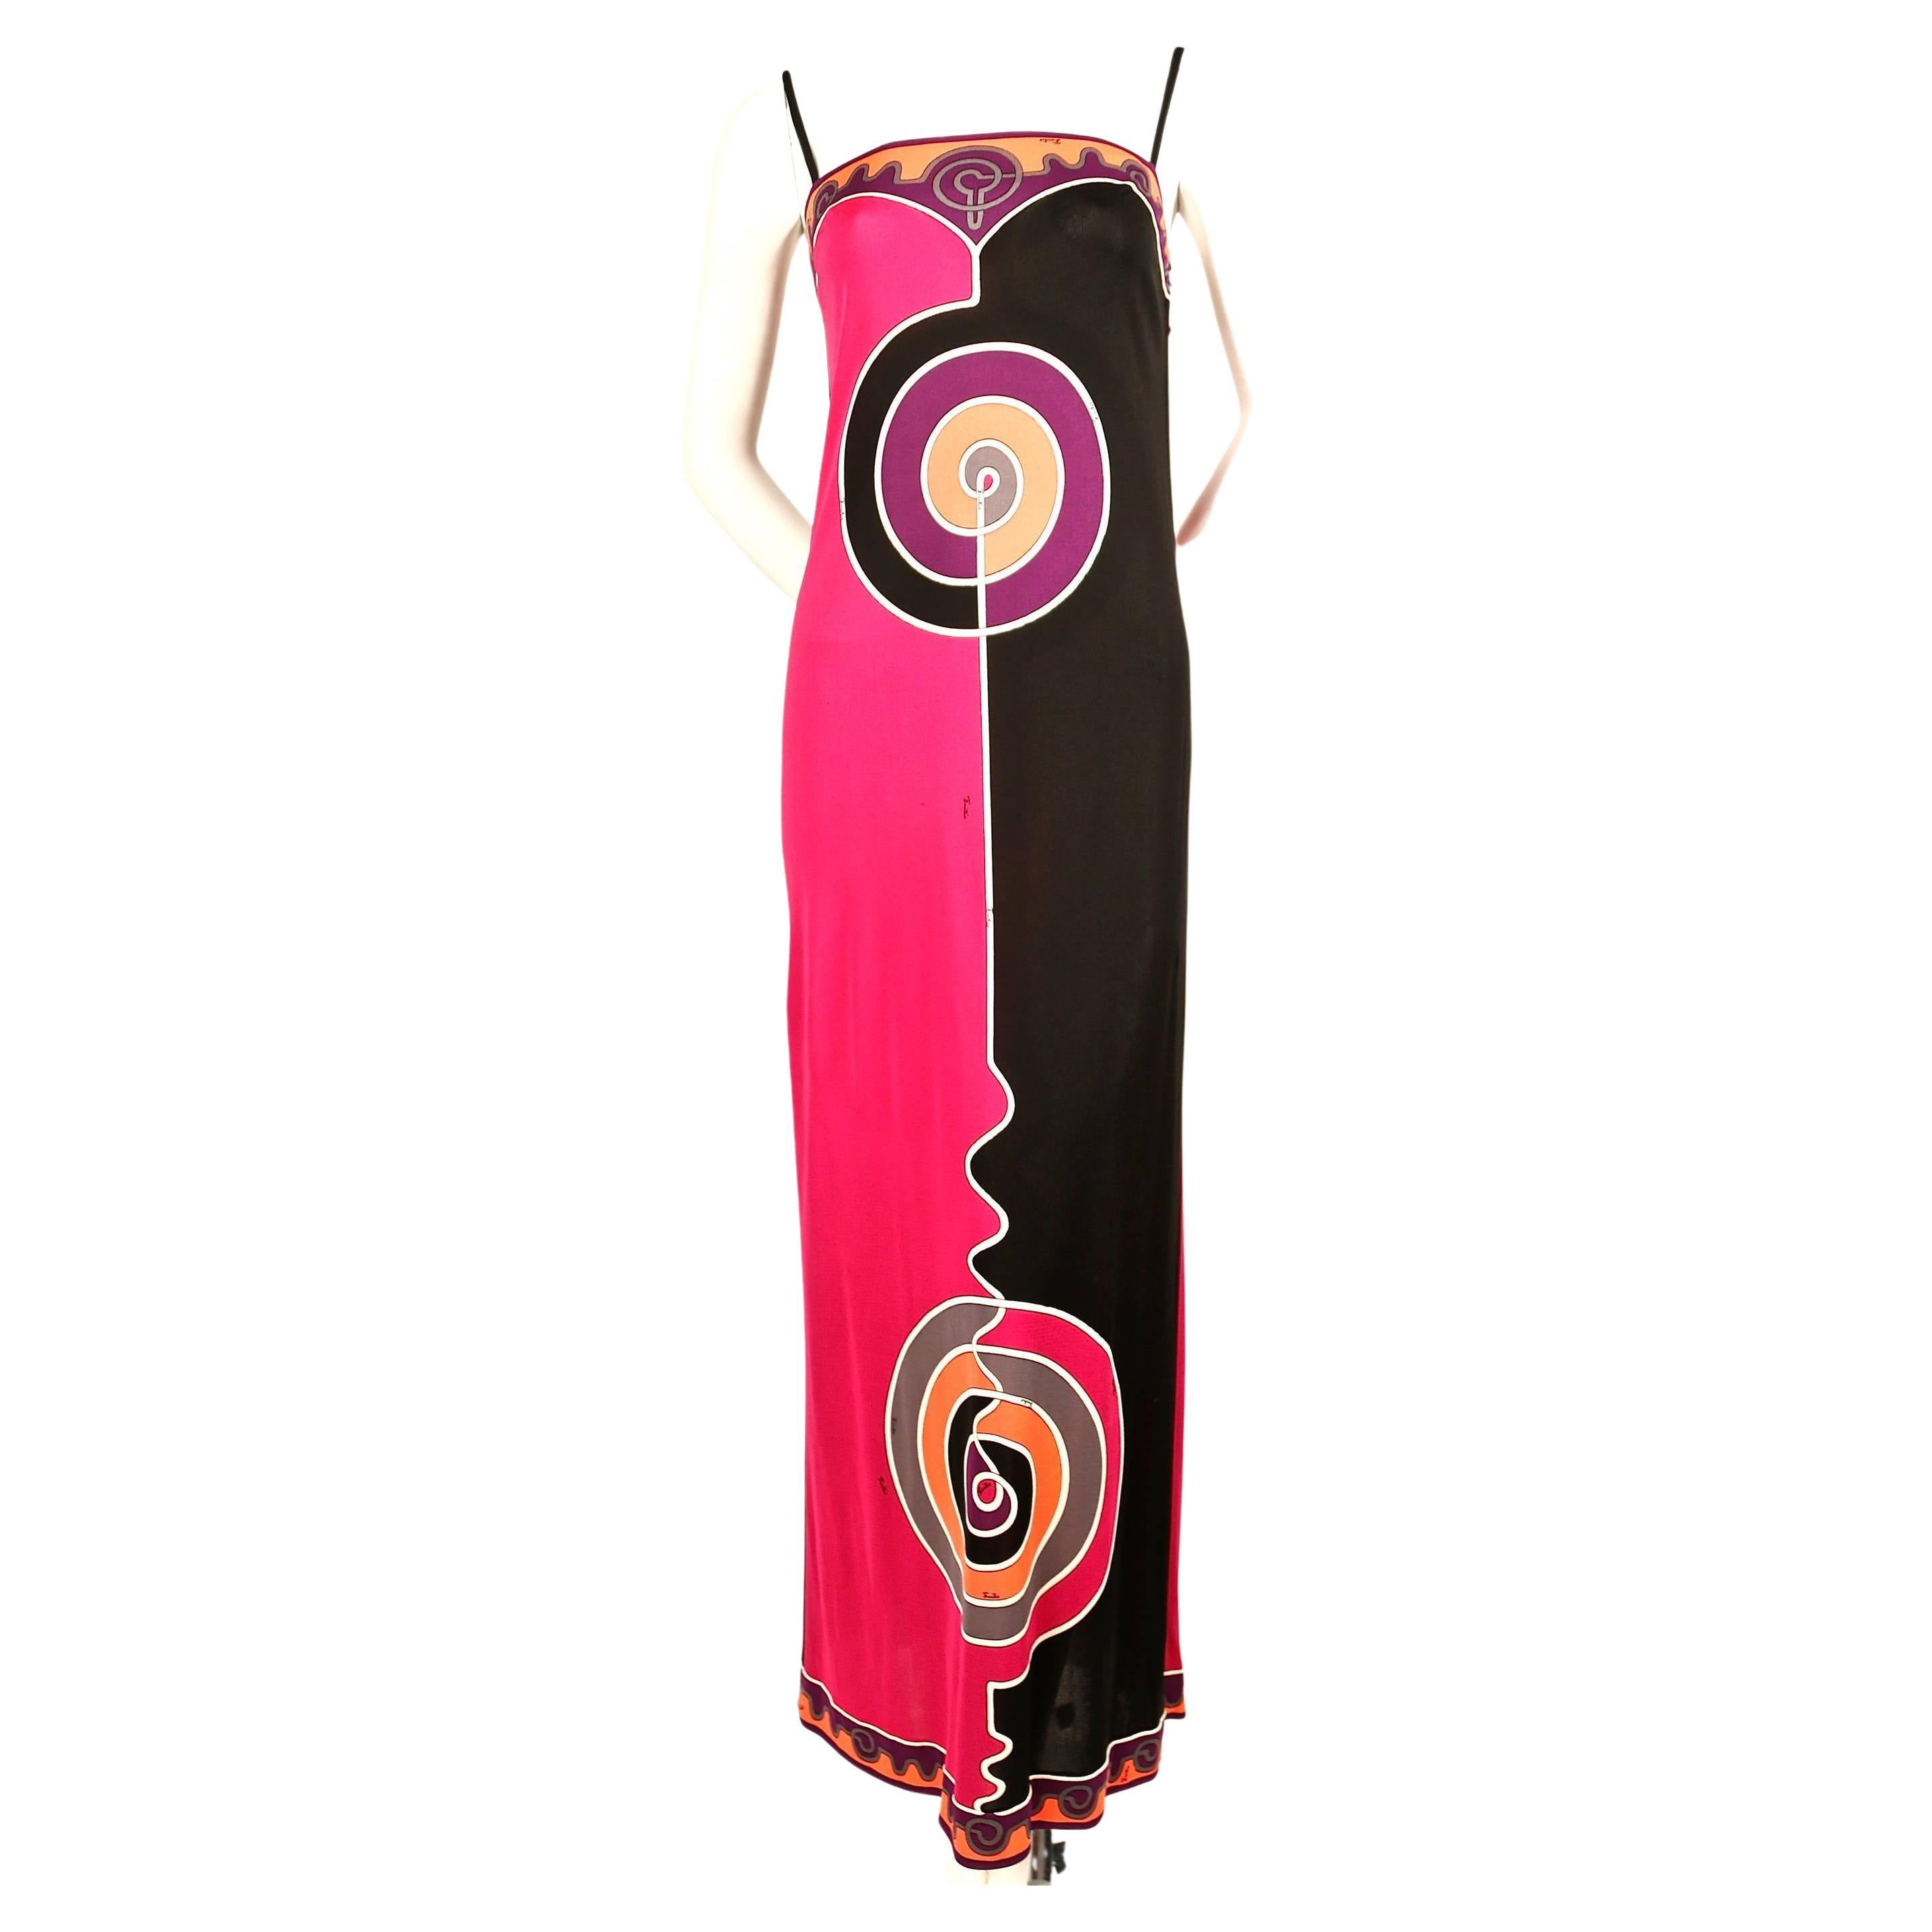 Exceptional, vivid, printed silk jersey spaghetti strap dress from Emilio Pucci dating to the late 1960’s, early 1970's. Labeled a size 6 however this would best fit a modern size 2. Approximate measurements: bust 31.5-32